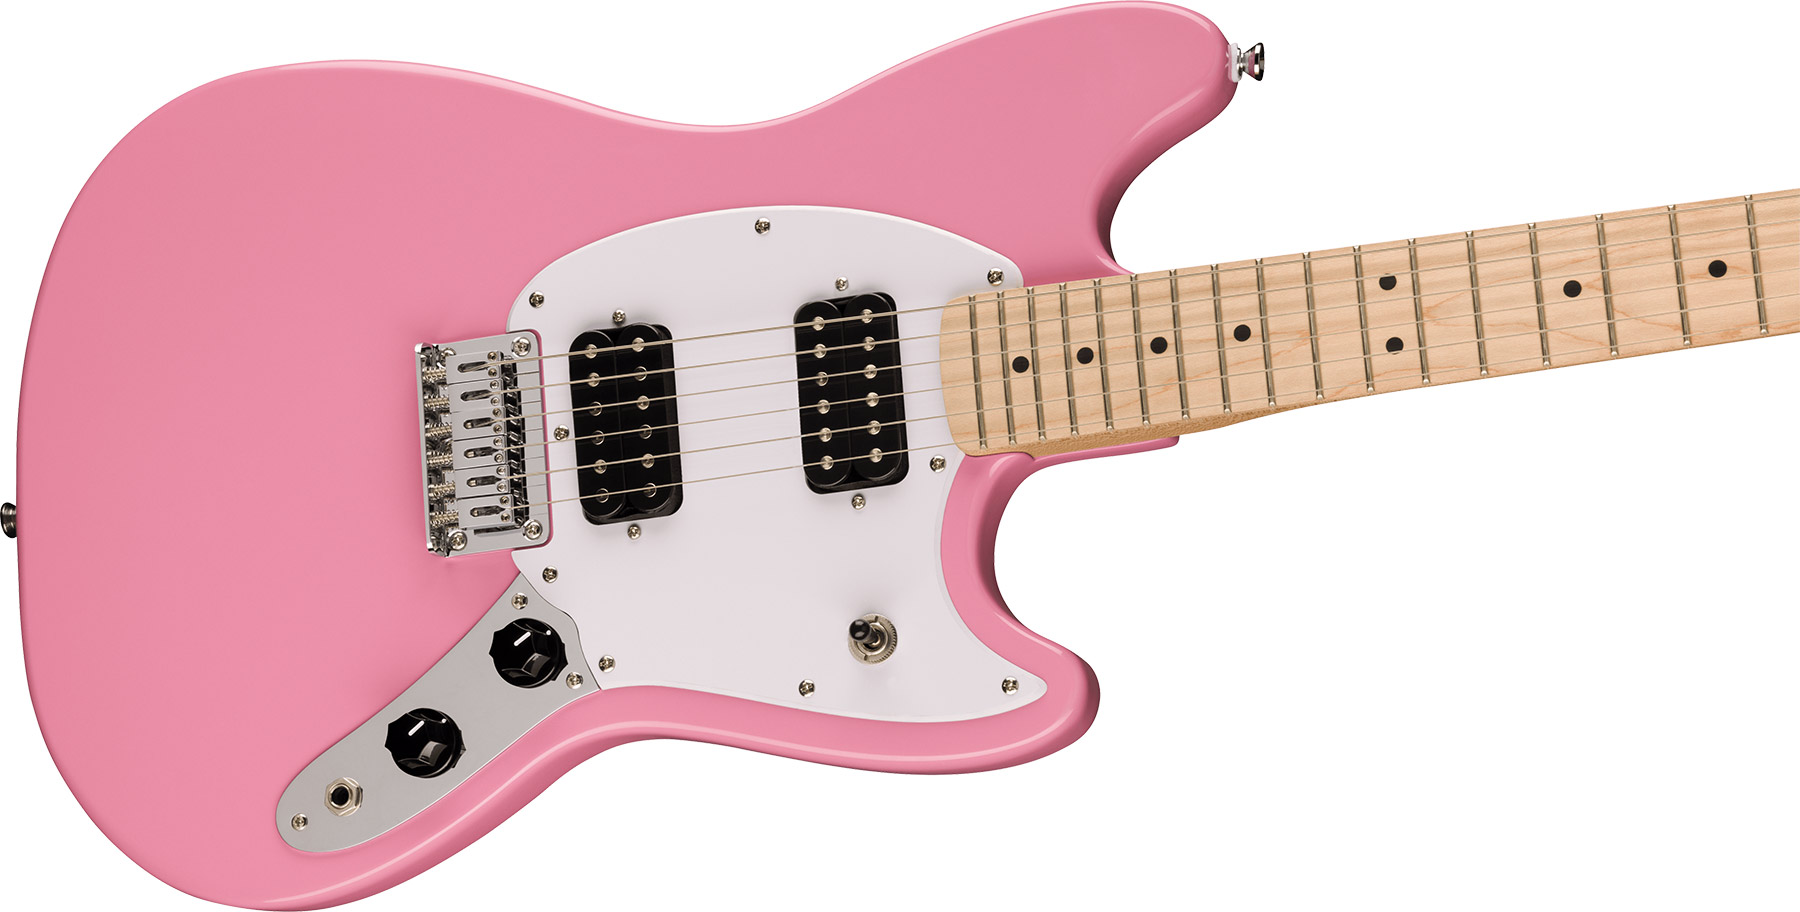 Squier Mustang Sonic Hh 2h Ht Mn - Flash Pink - Retro rock electric guitar - Variation 2